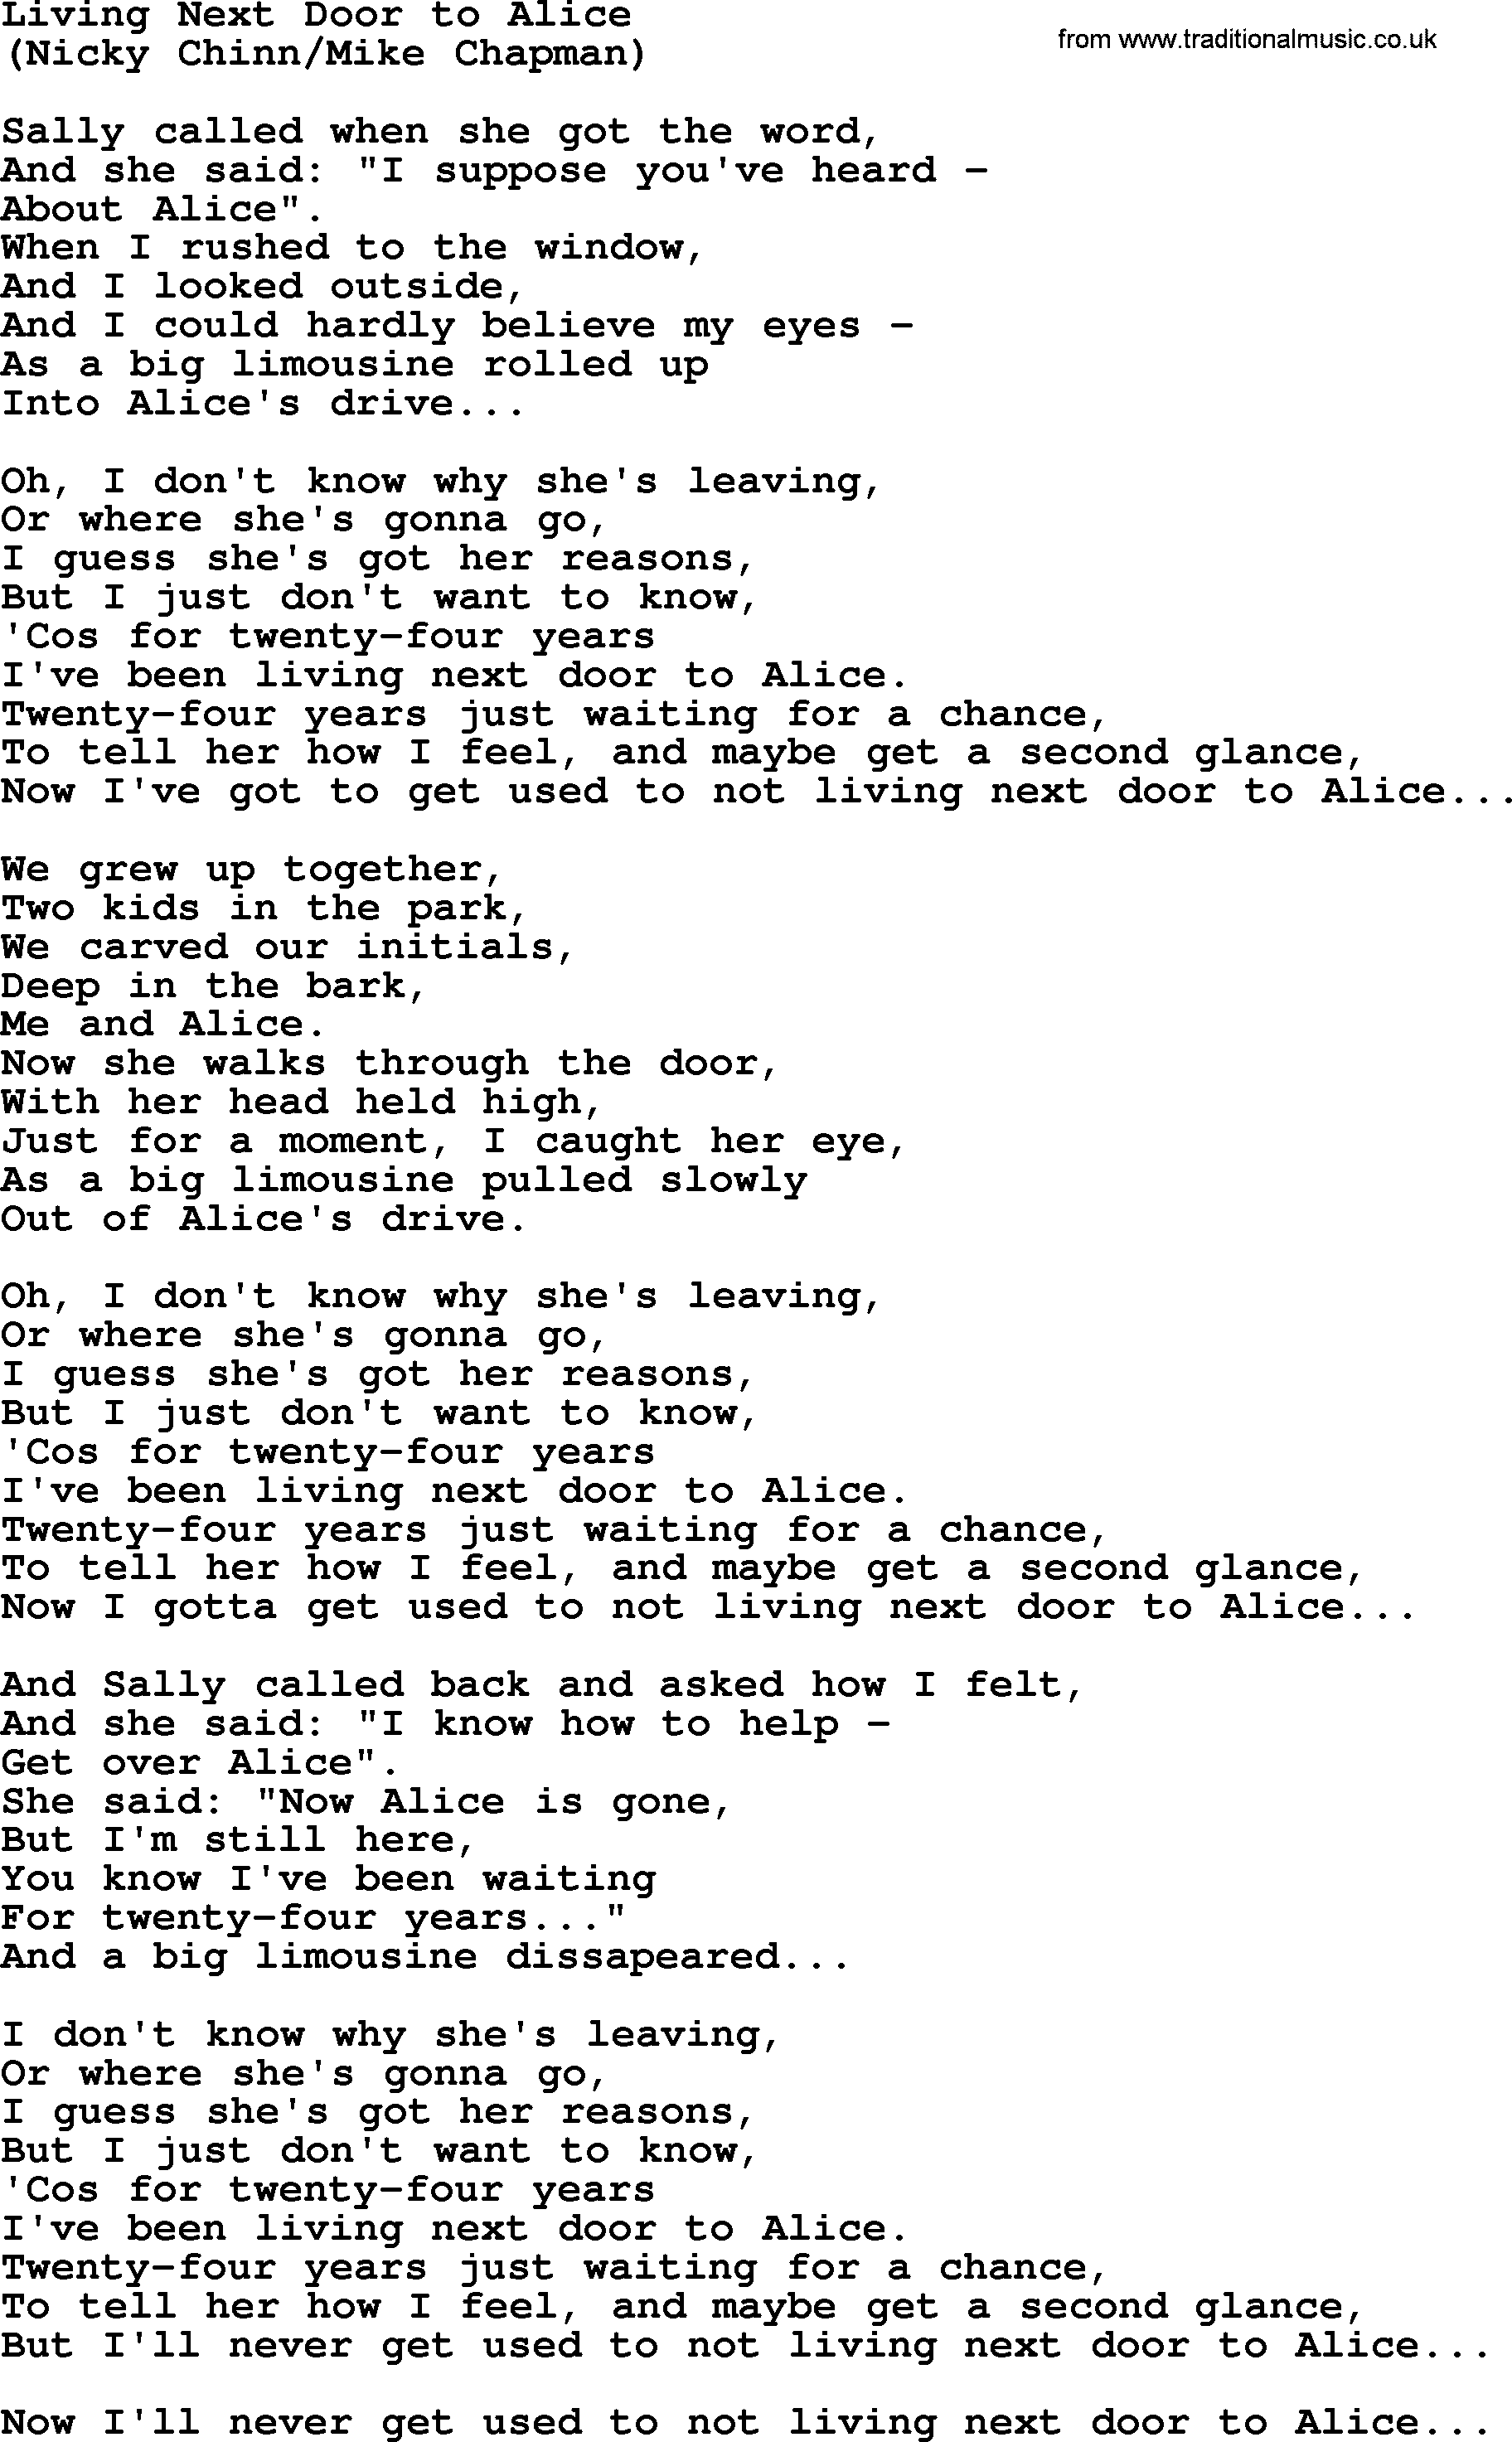 The Byrds song Living Next Door To Alice, lyrics